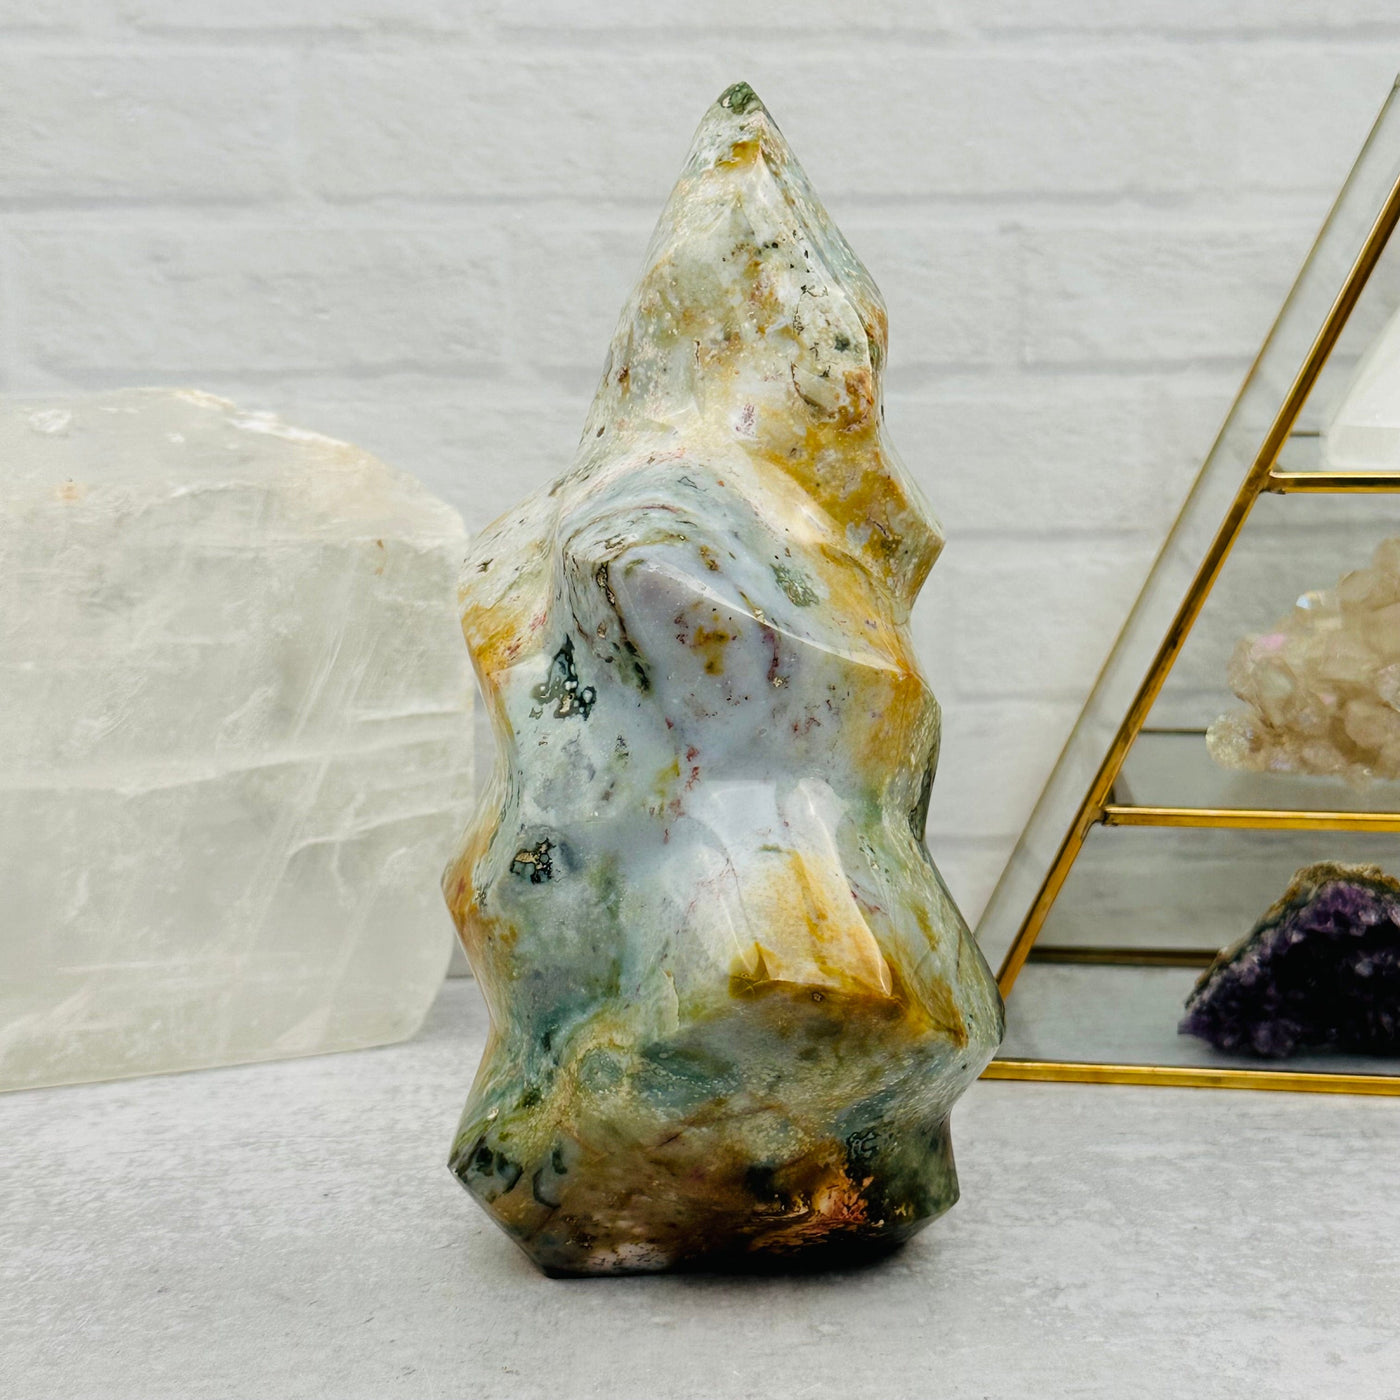 Ocean Jasper Flame Point displayed as home decor